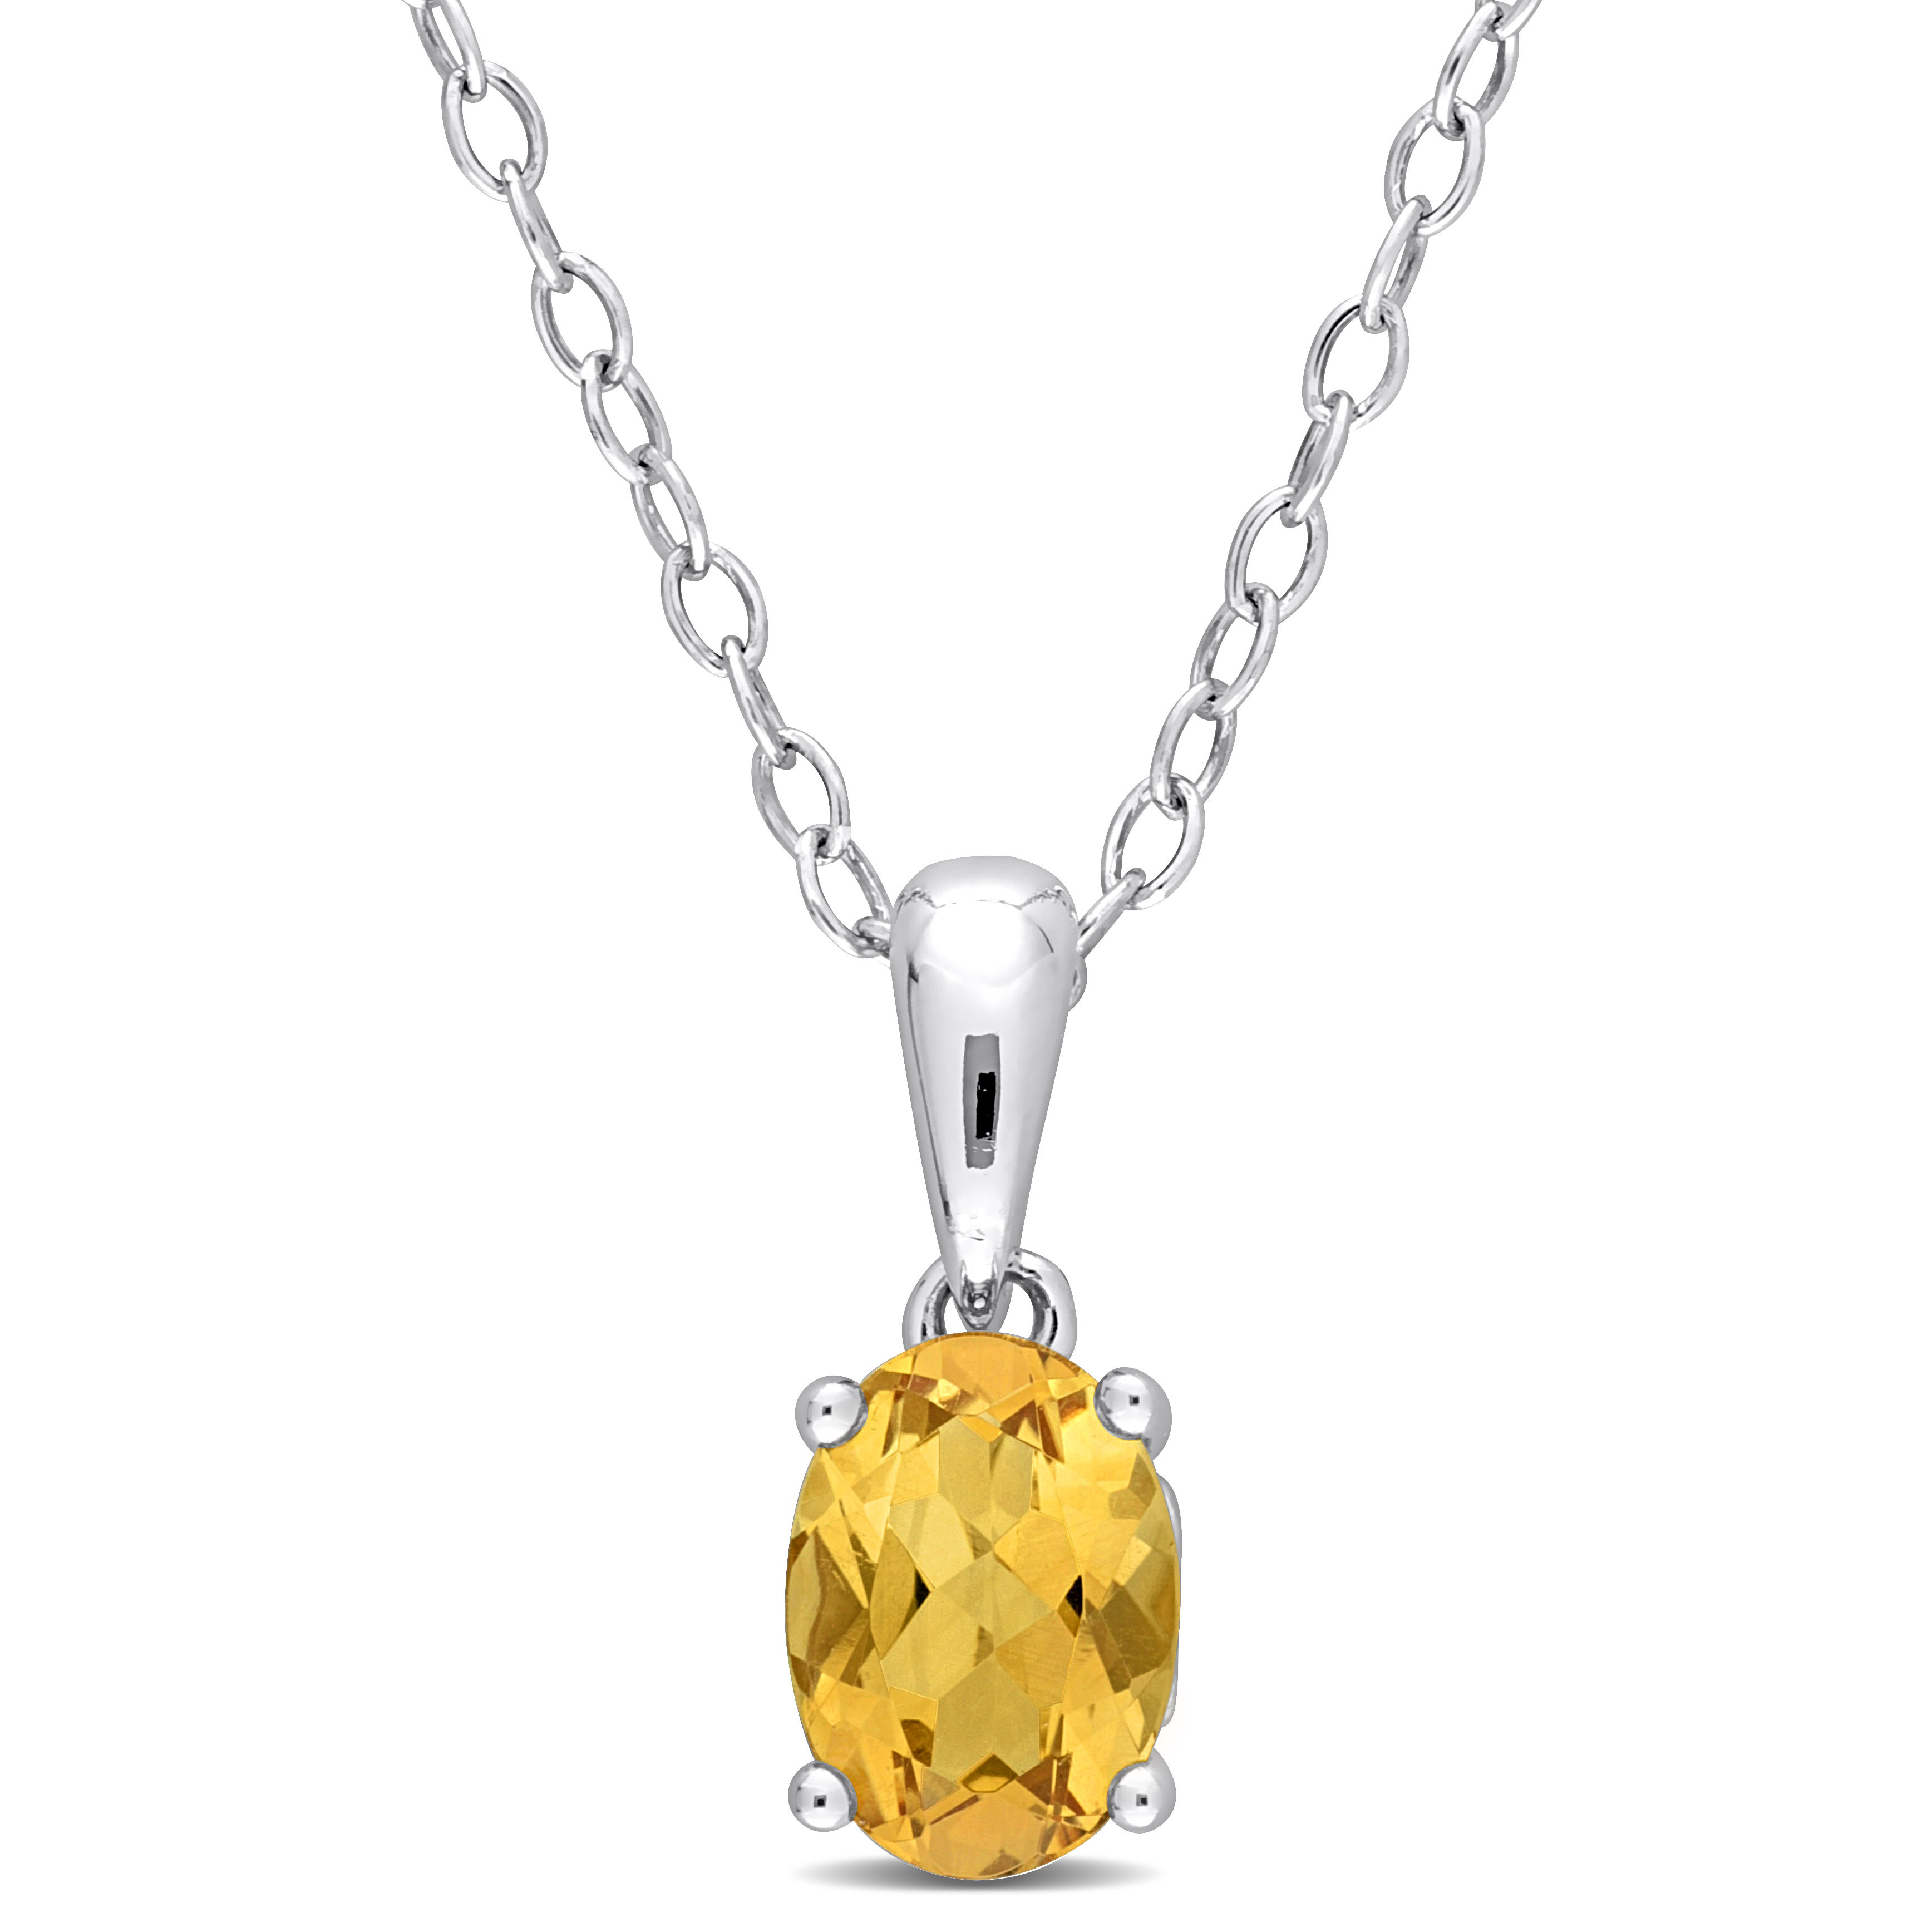 3/4 CT TGW Oval Citrine Solitaire Heart Design Pendant with Chain in Sterling Silver - 18 in.